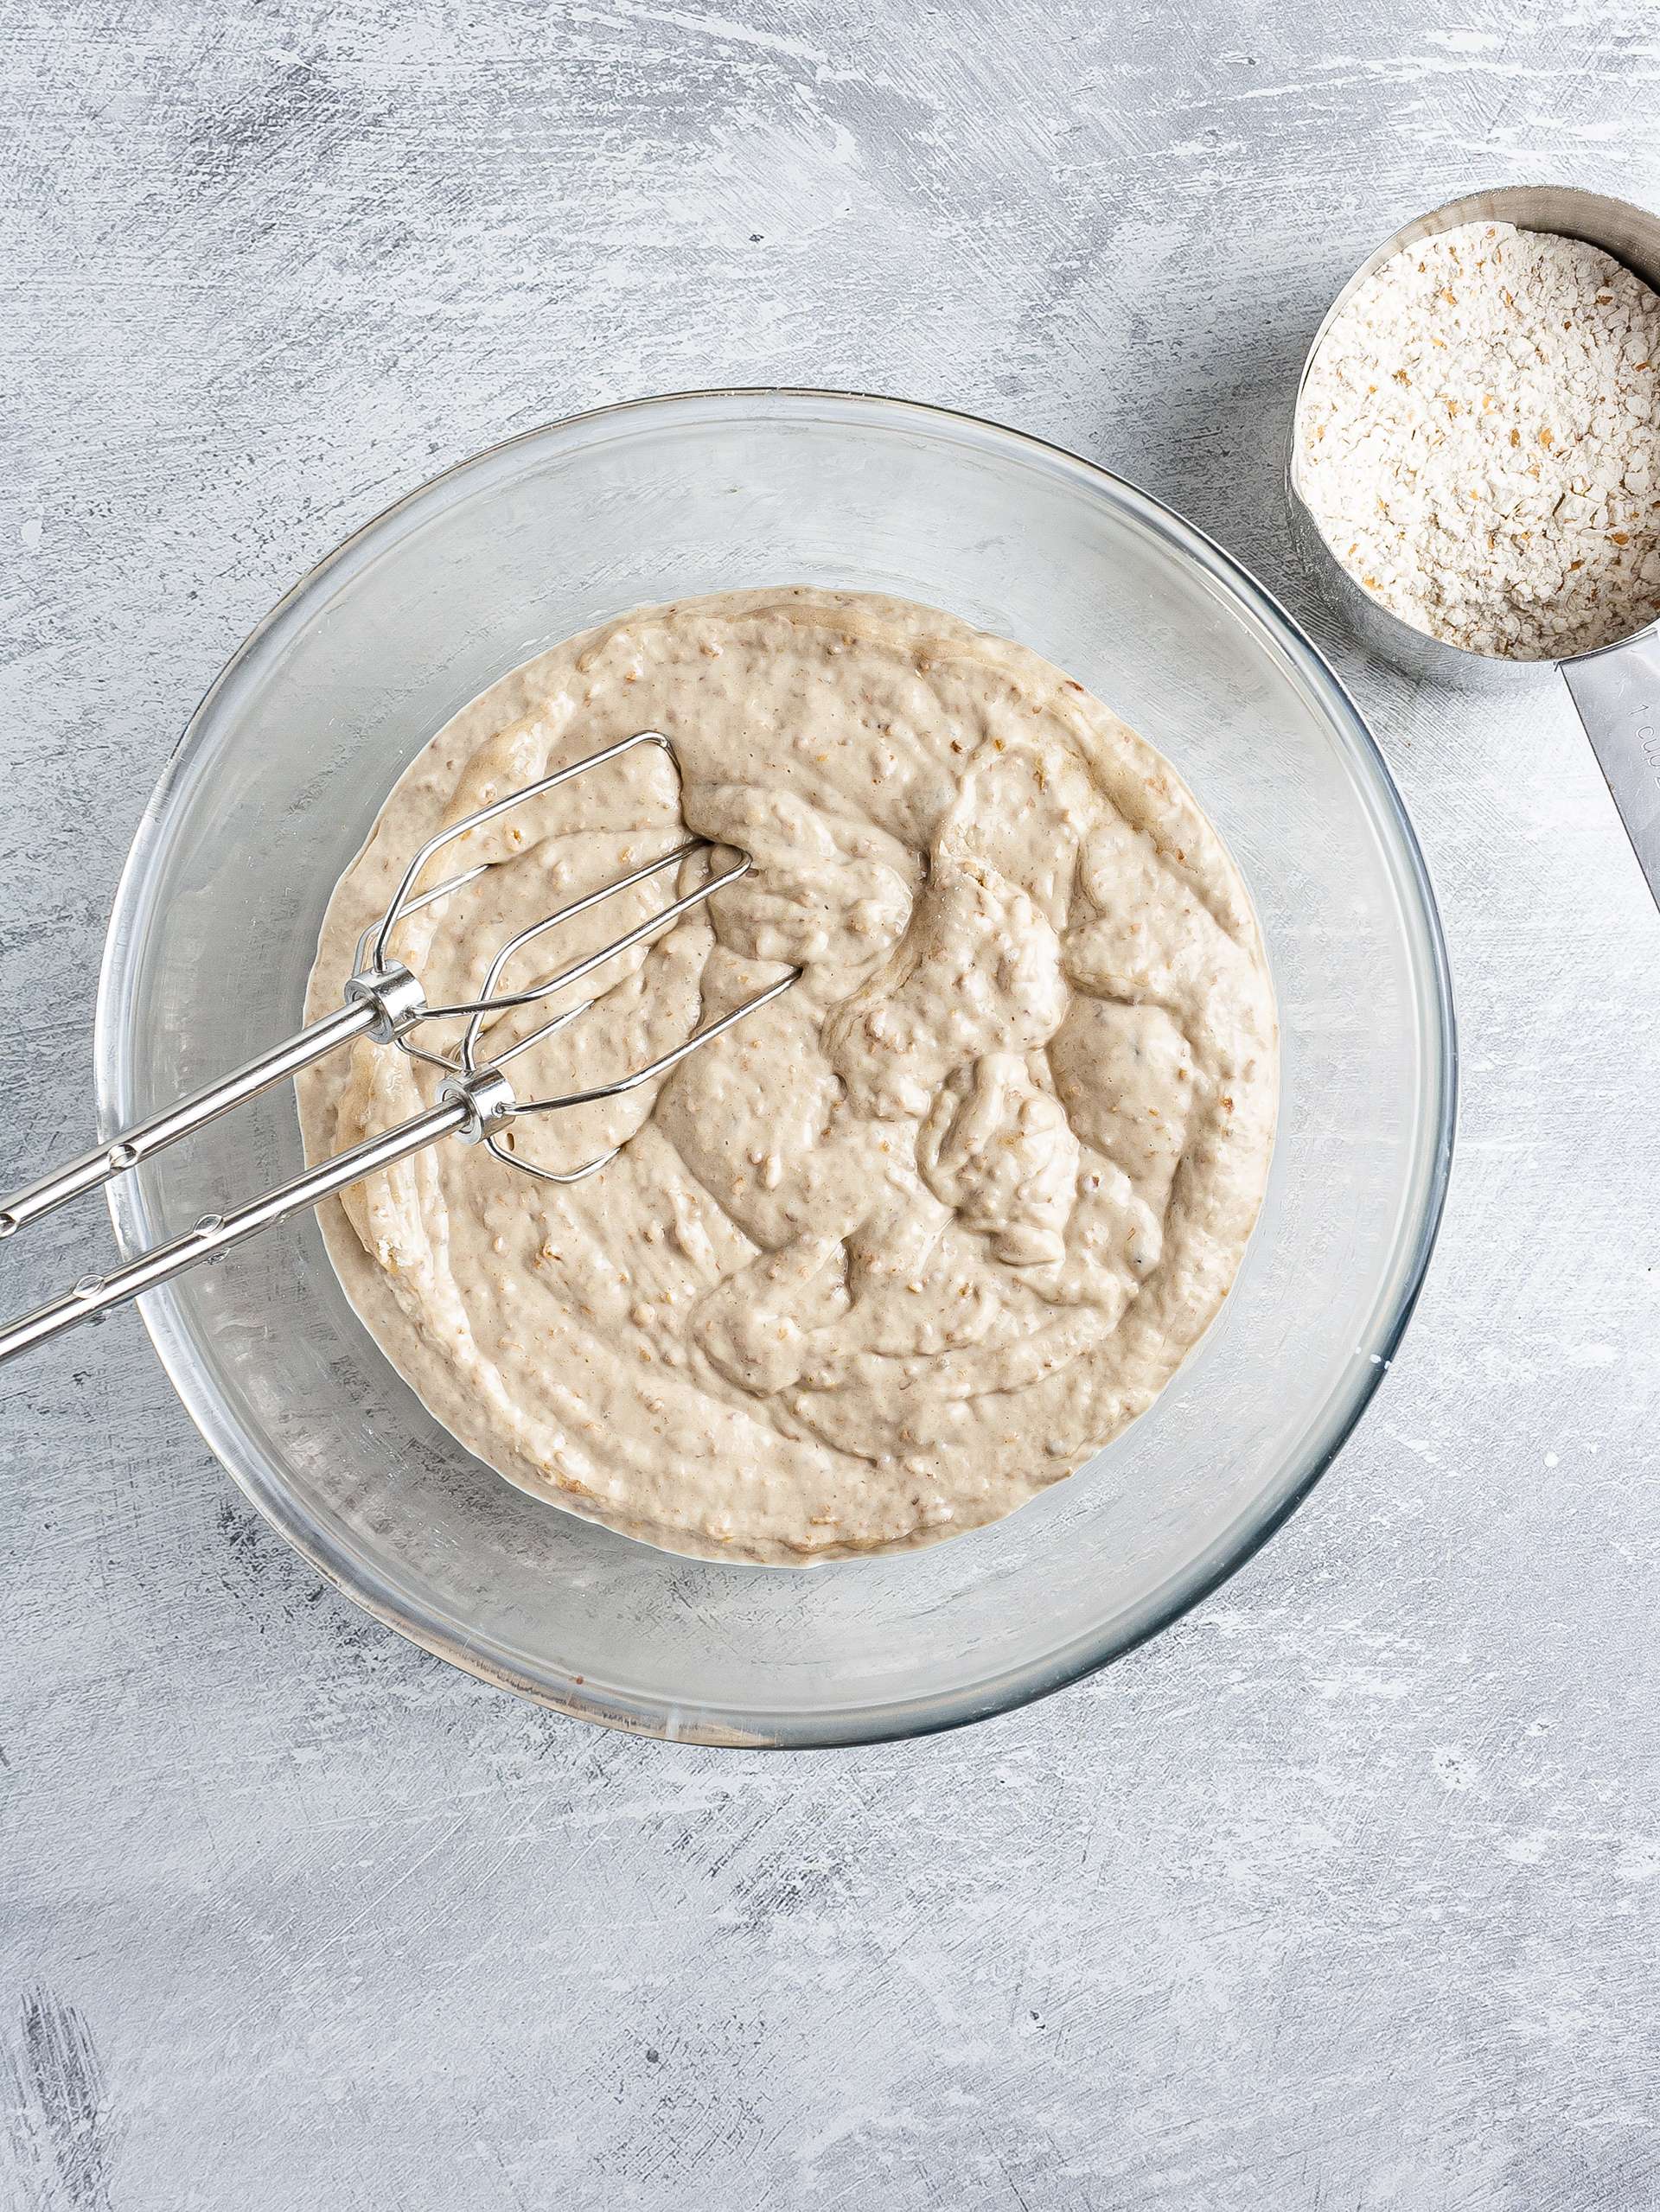 Banana bread batter with wholemeal flour